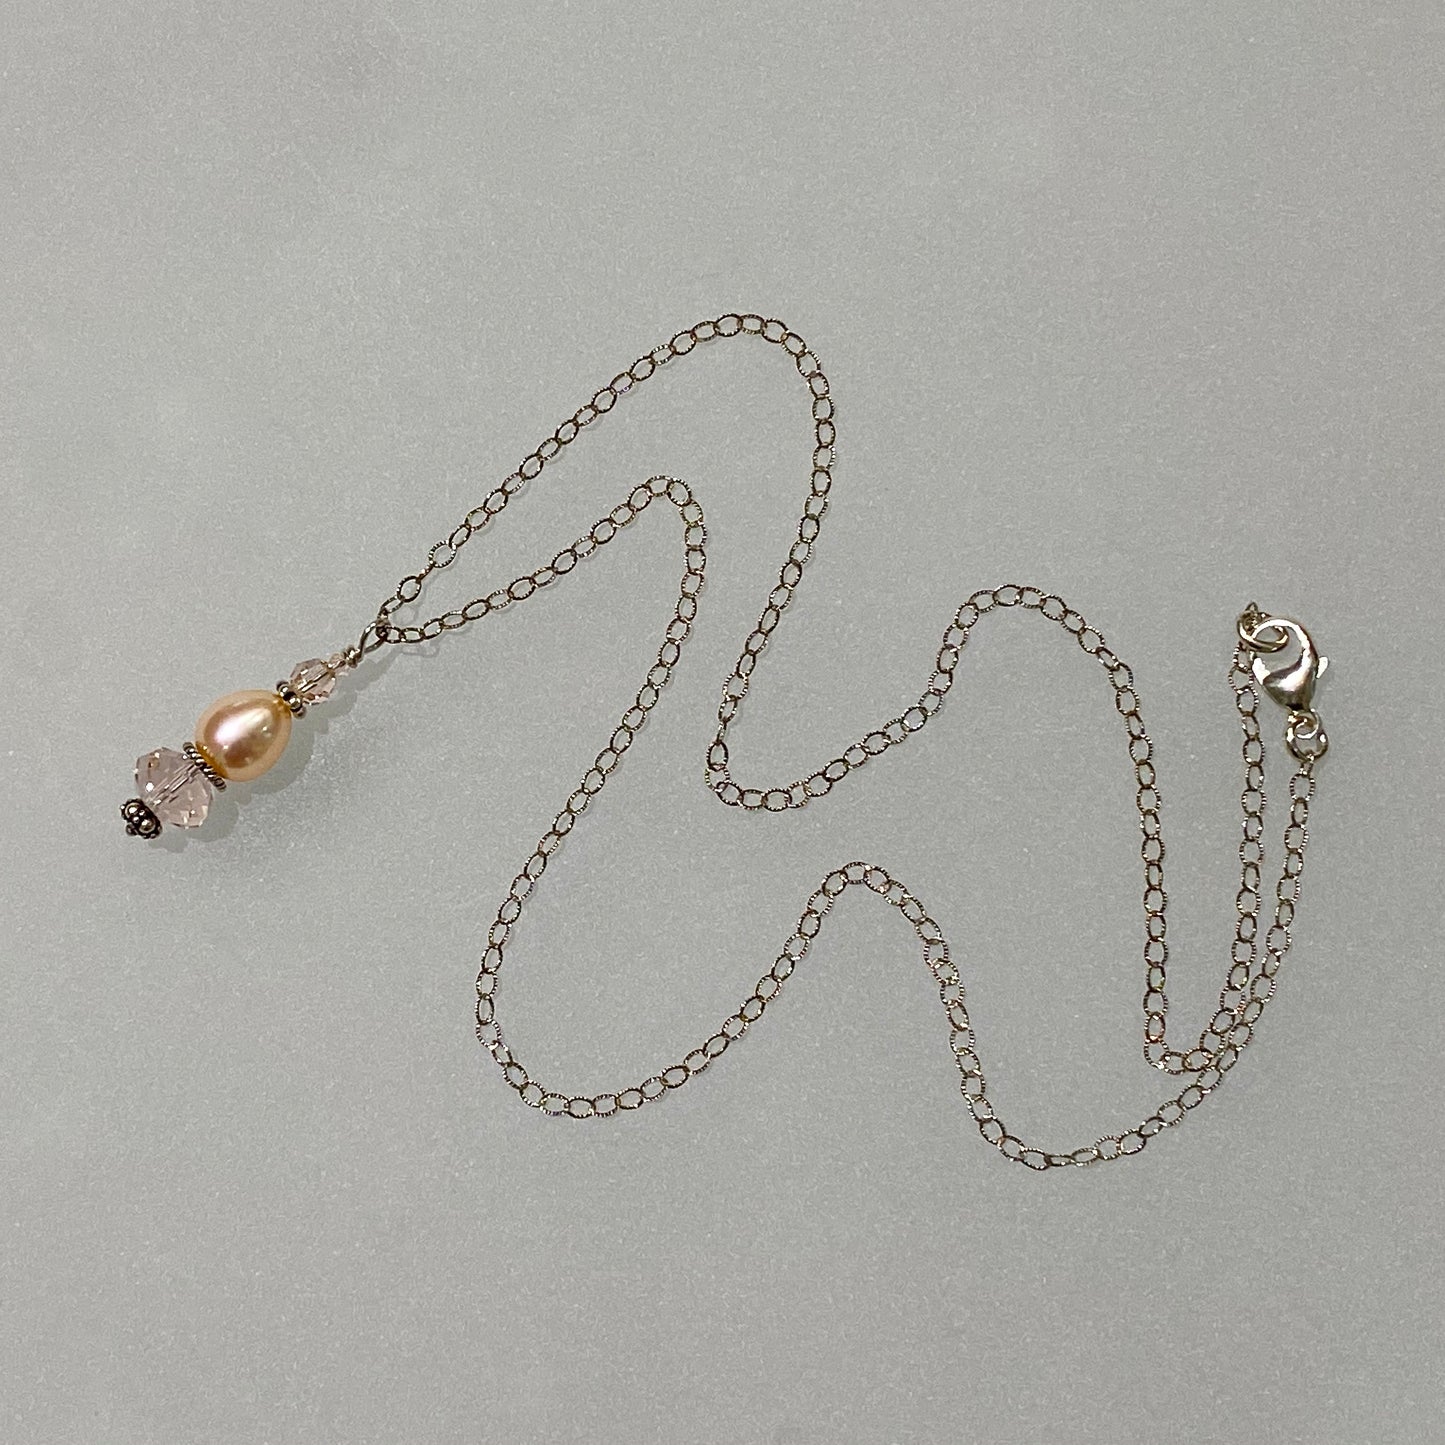 Peach Cultured Pearl & Crystal Drop Pendant on 18" Textured Oxidized Sterling Silver Chain